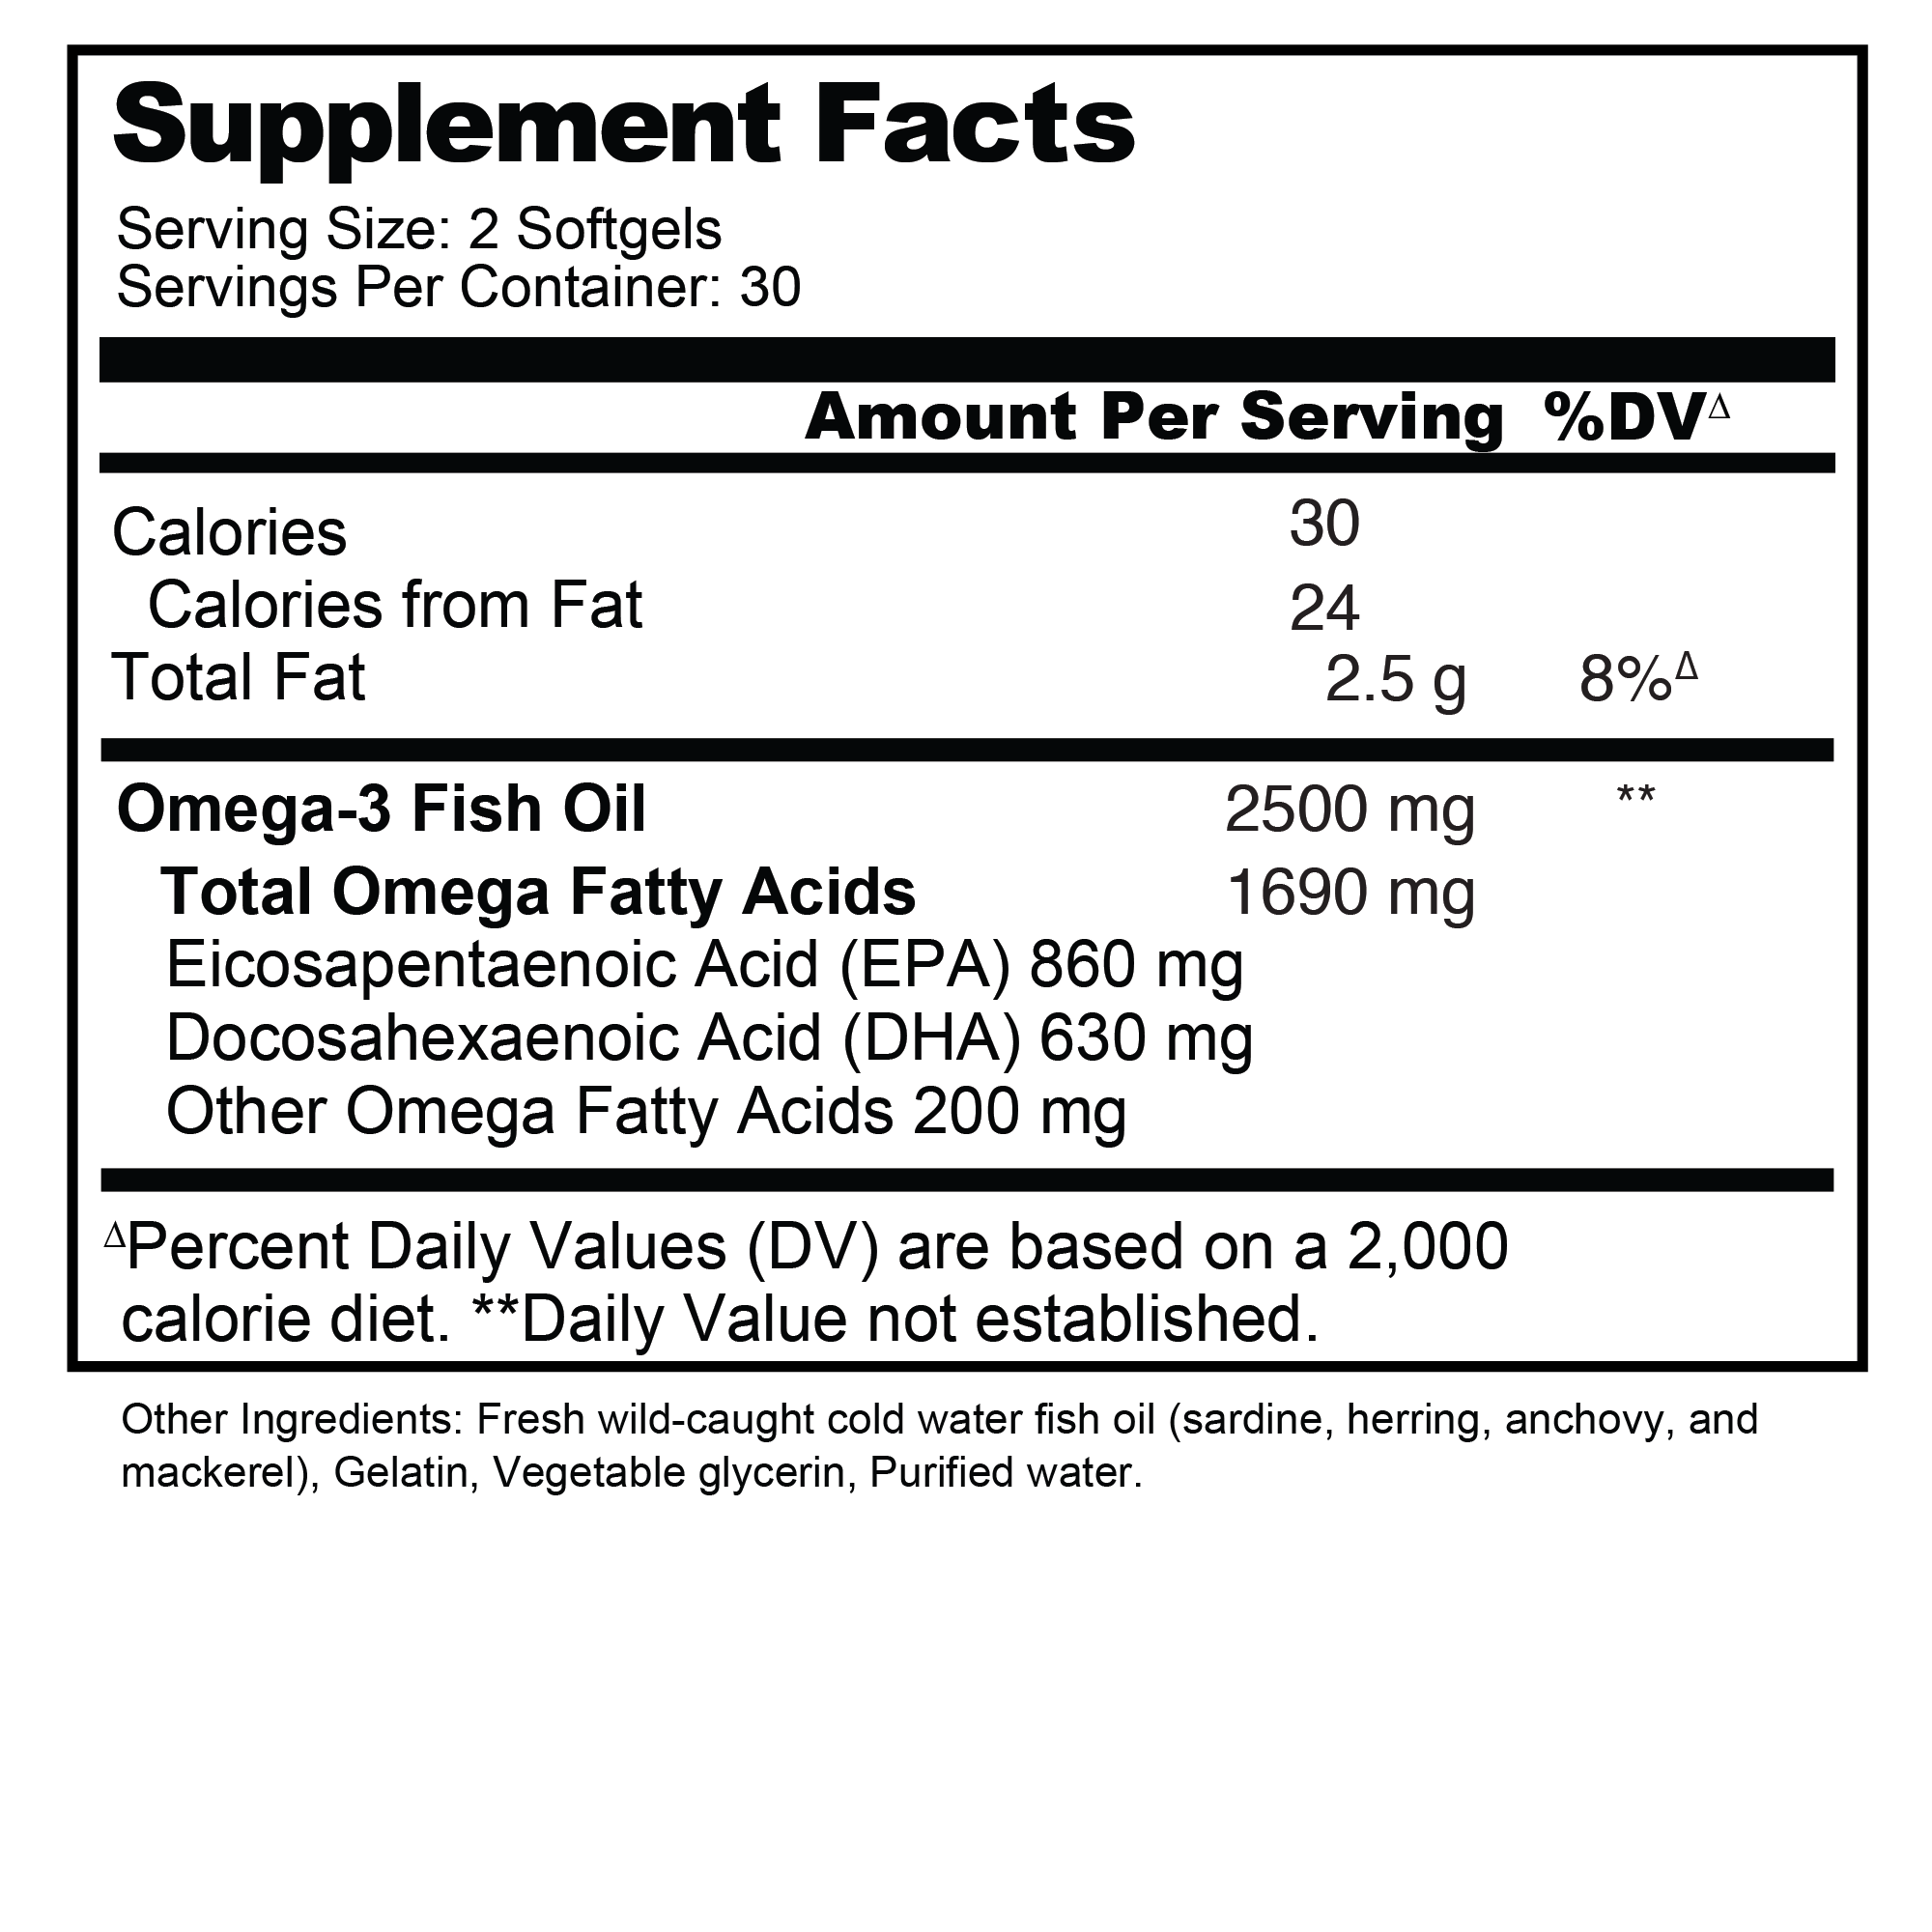 omega-3 fish oil supplement facts